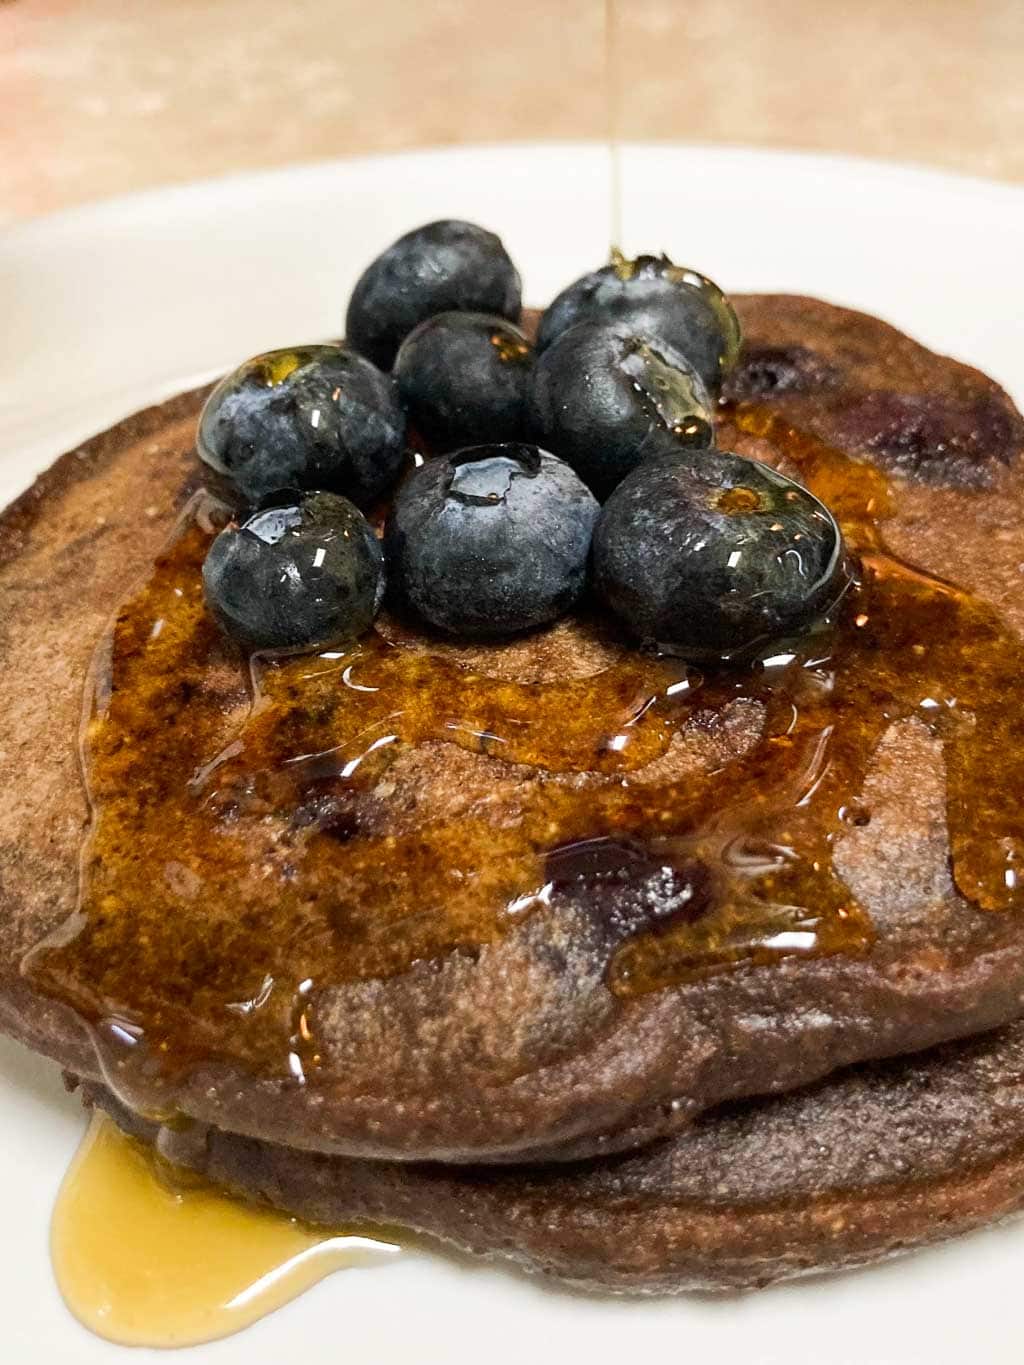 https://www.travel-experience-live.com/wp-content/uploads/2022/03/Wild-rice-pancakes-with-blueberries-and-maple-syrup-drizzle-recipe.jpg?x58602